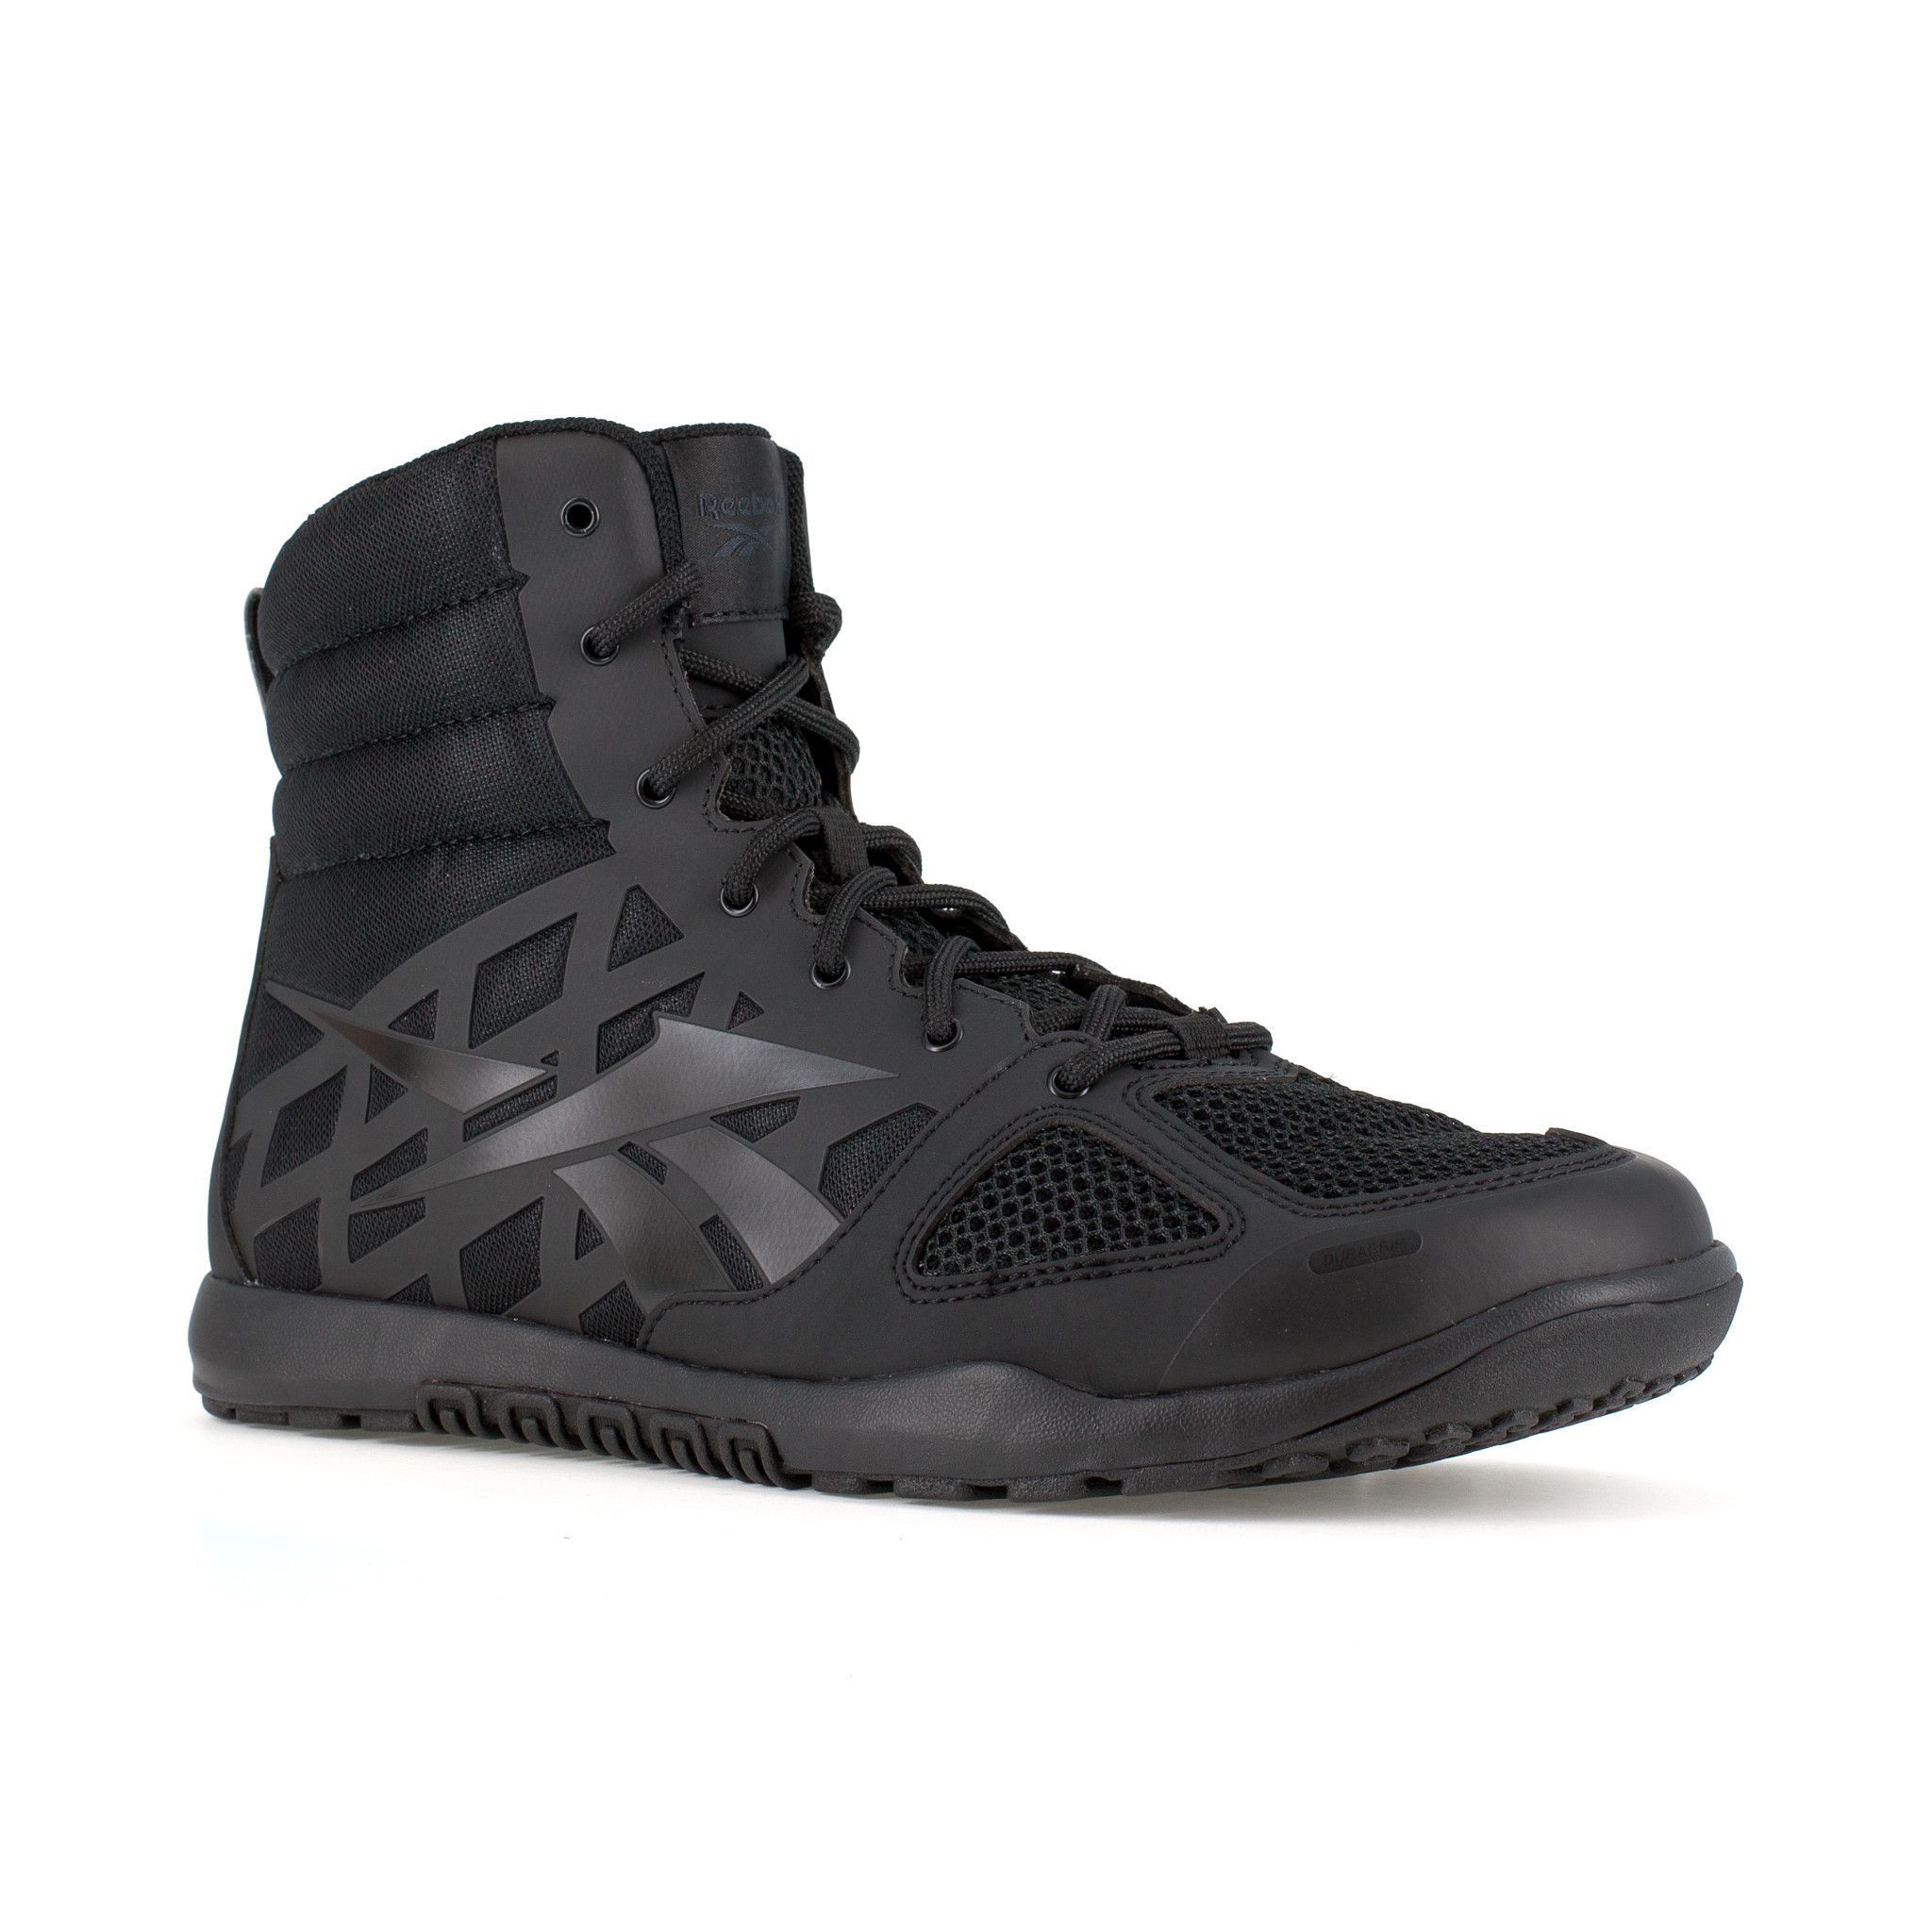 Reebok revolutionizes tactical footwear with Nano Tactical Series